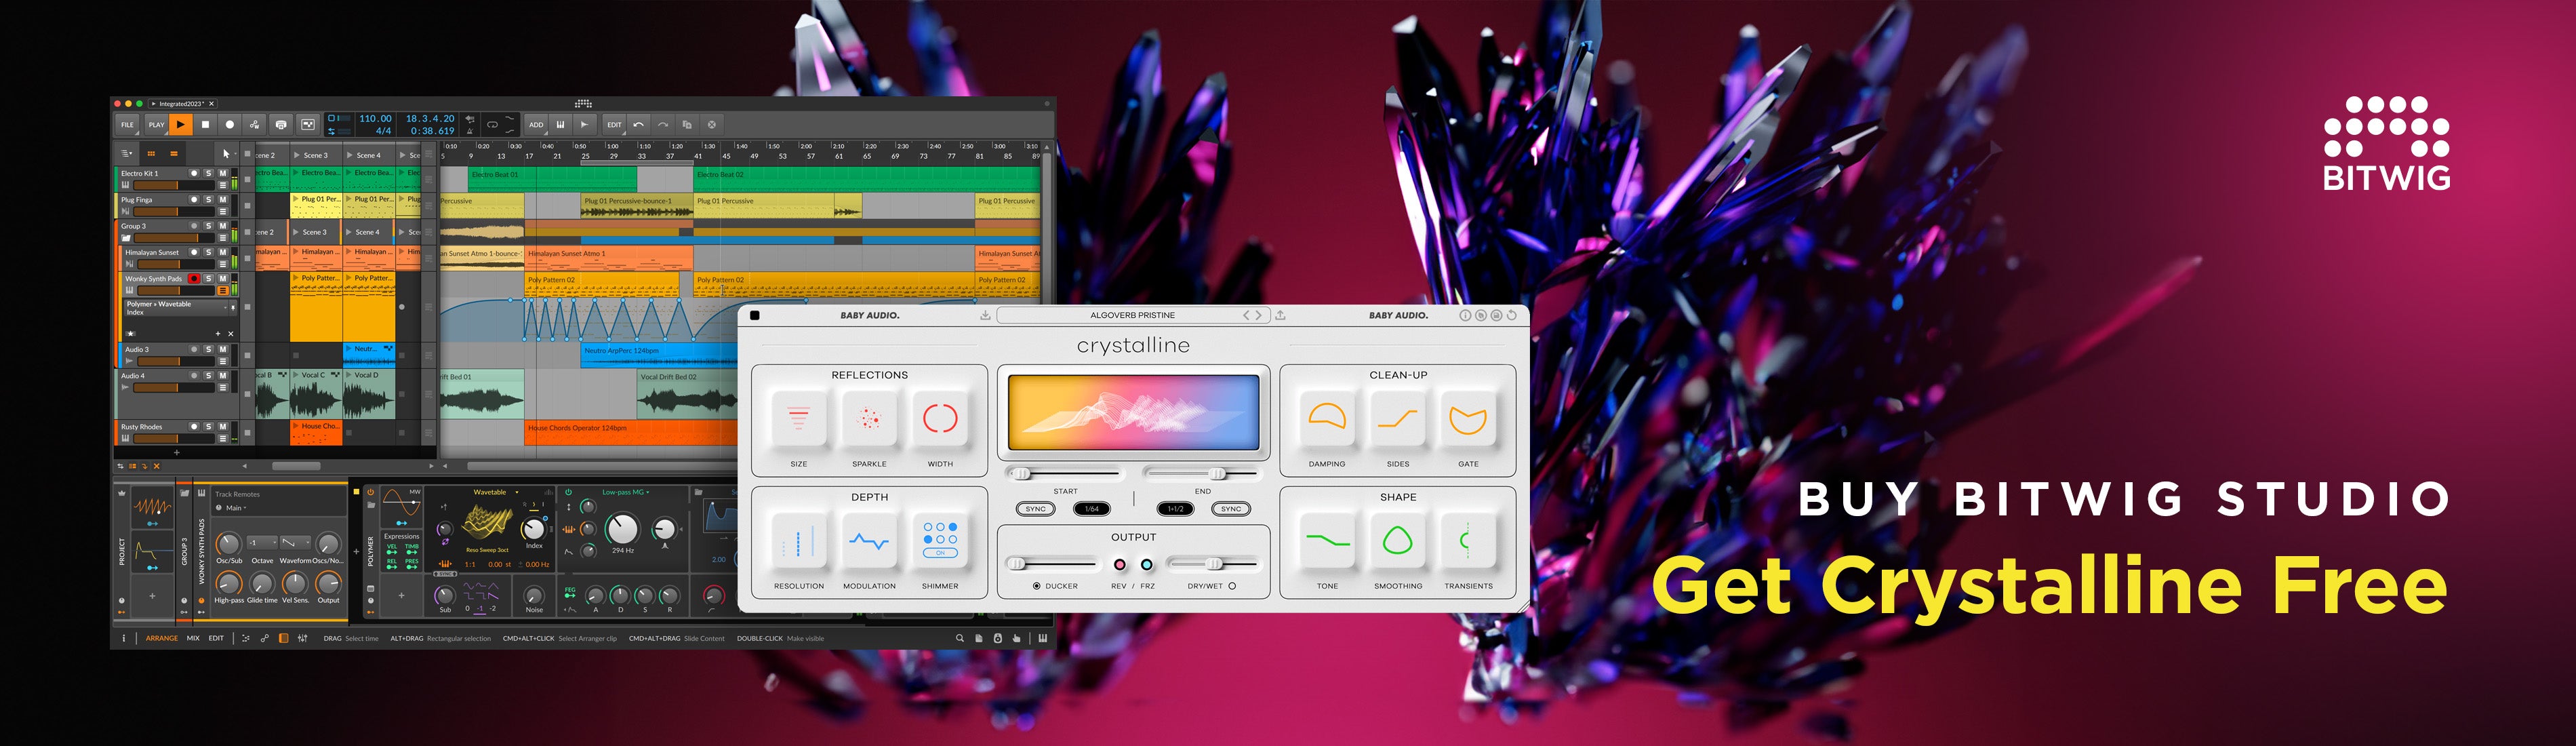 Bitwig Studio with Crystalline from Baby Audio (worth $99) for free!